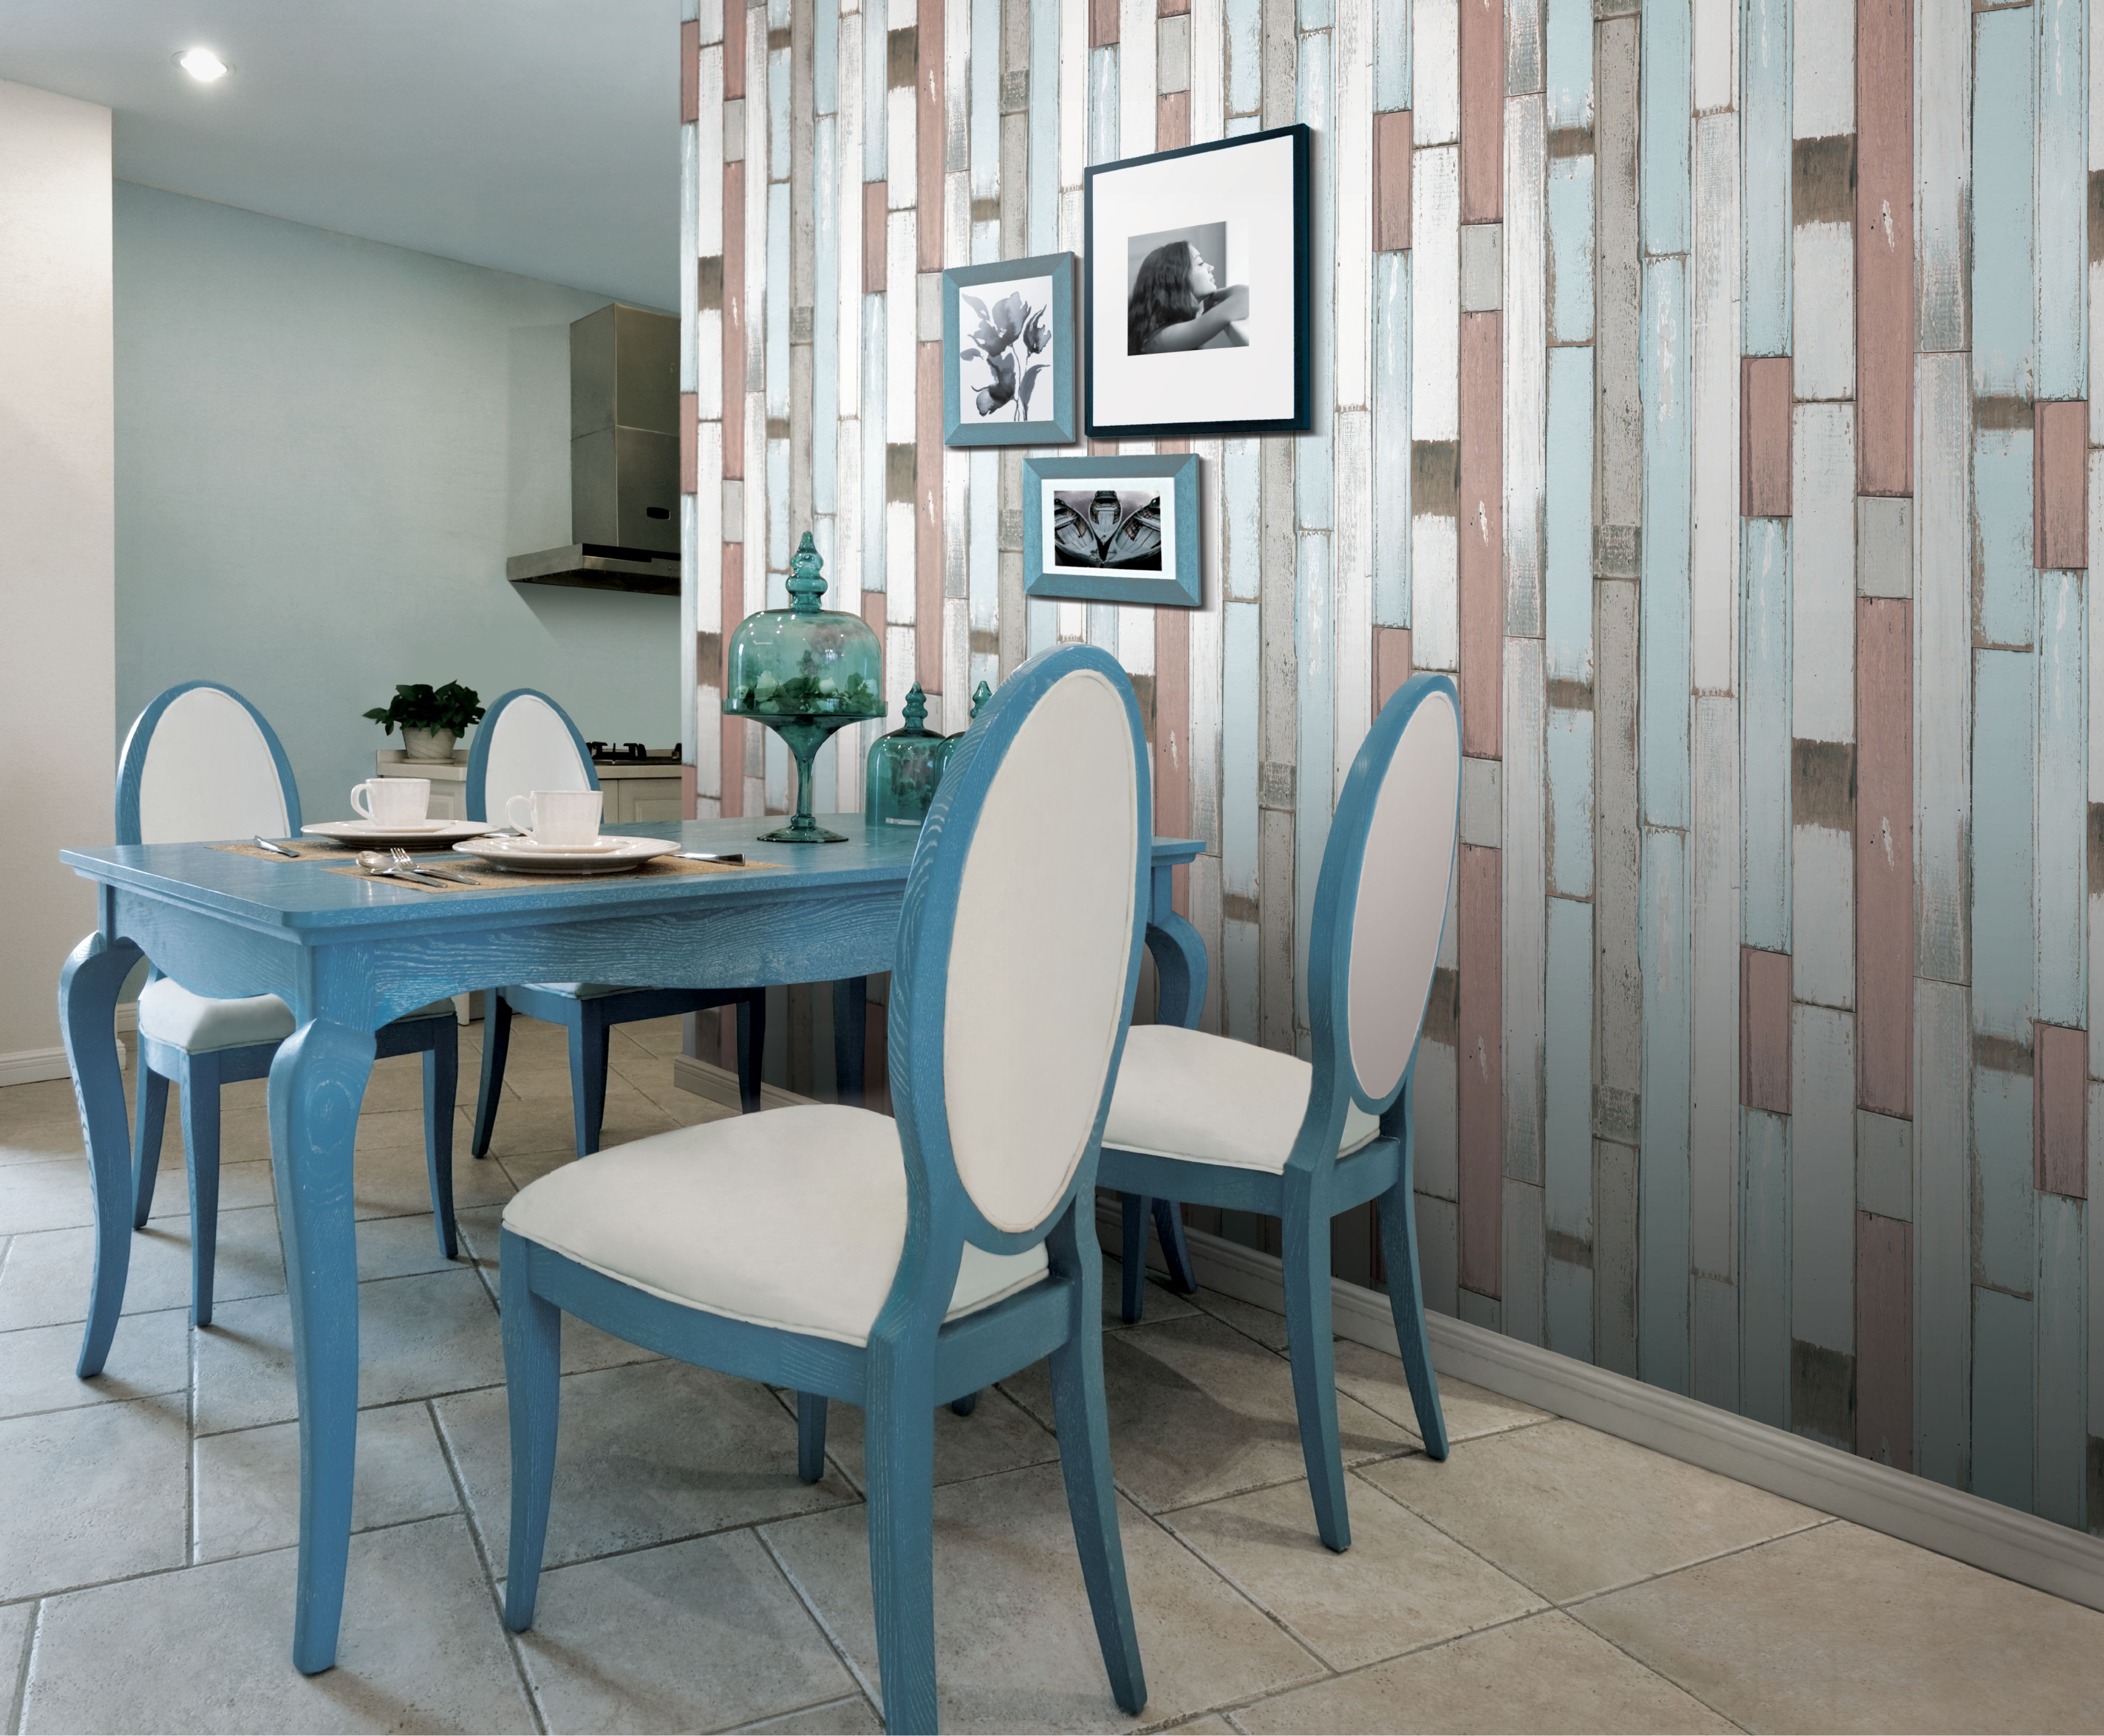 Multi Wood Panelling By Serendipity At Wallpaperdirect Co Uk